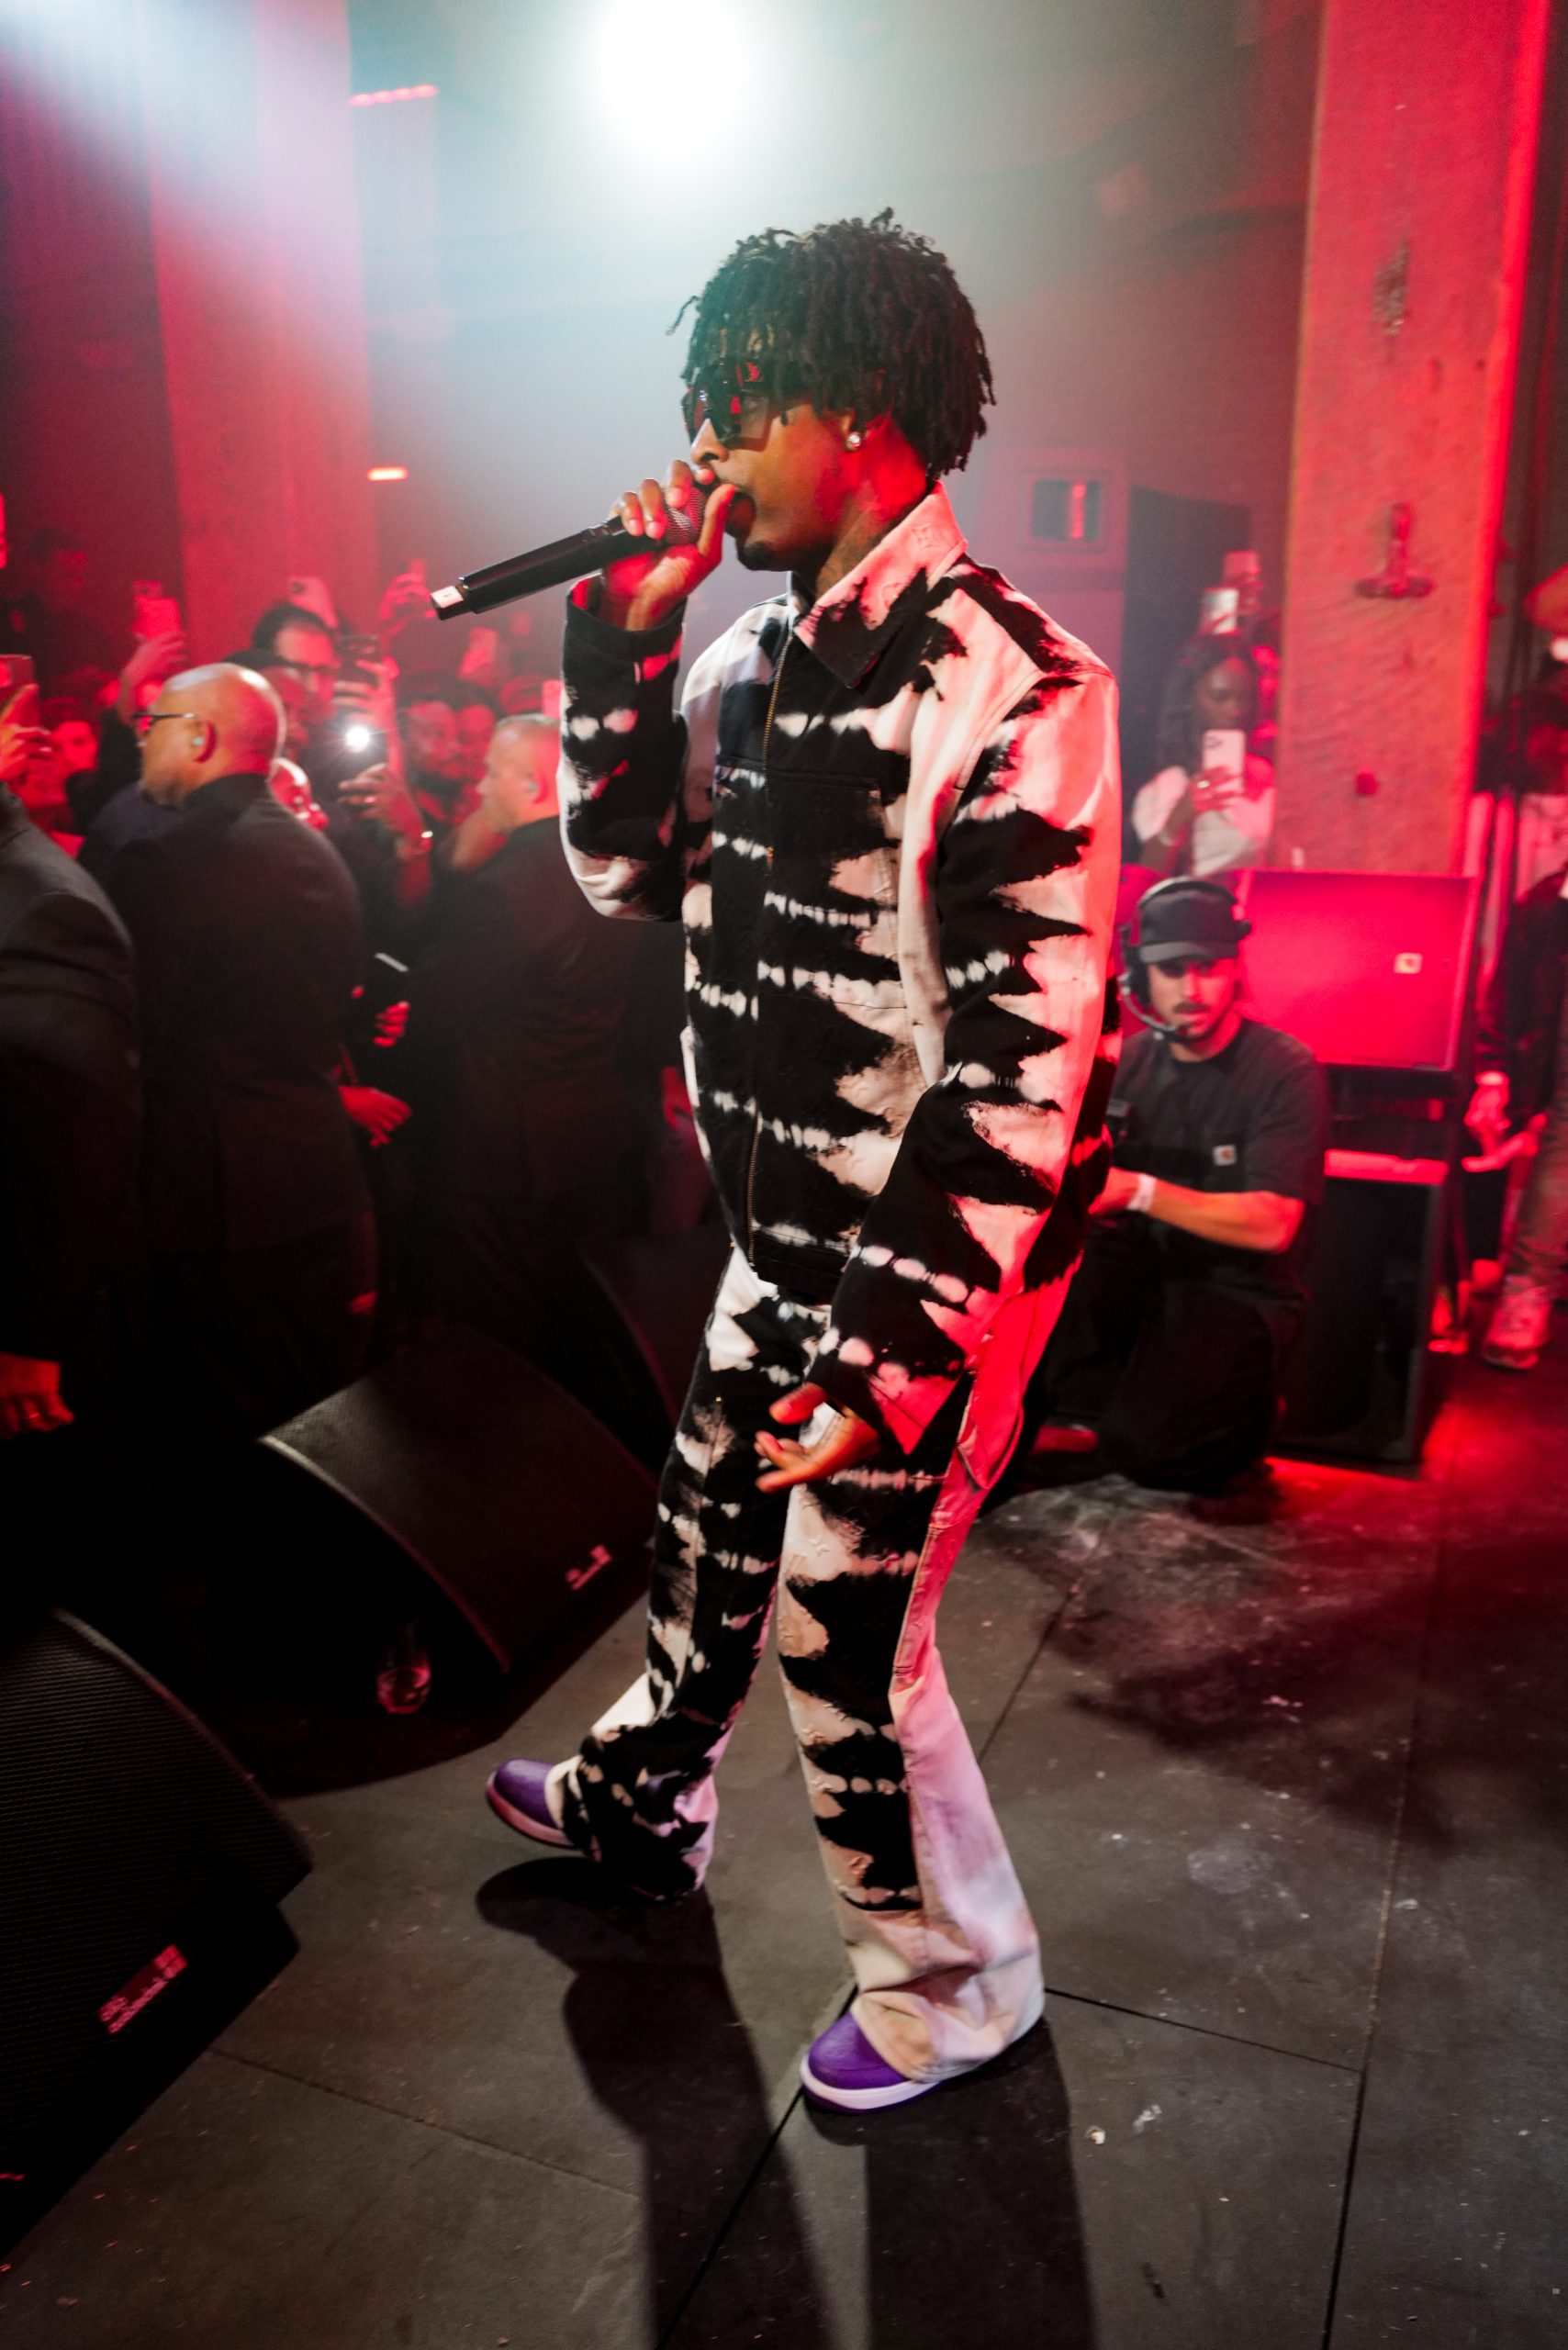 Louis Vuitton celebrates “Nike's Air Force 1 by Virgil Abloh” exhibition  opening event. 21 Savage and Metro Boomin closed the exhibition opening  event with a dope performance!